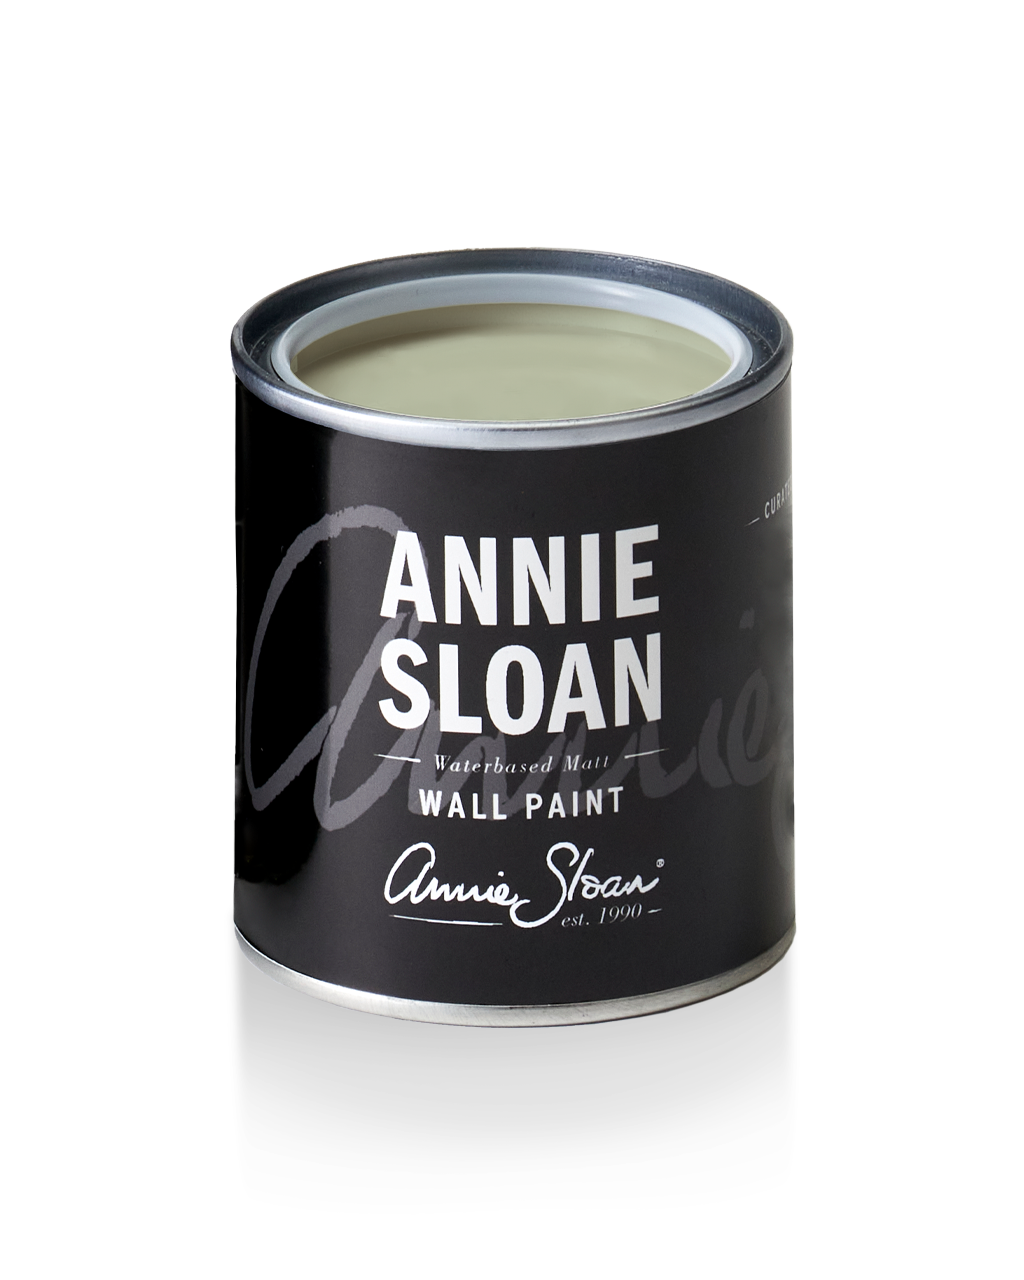 120ml tin of Terre Verde wall paint by Annie Sloan